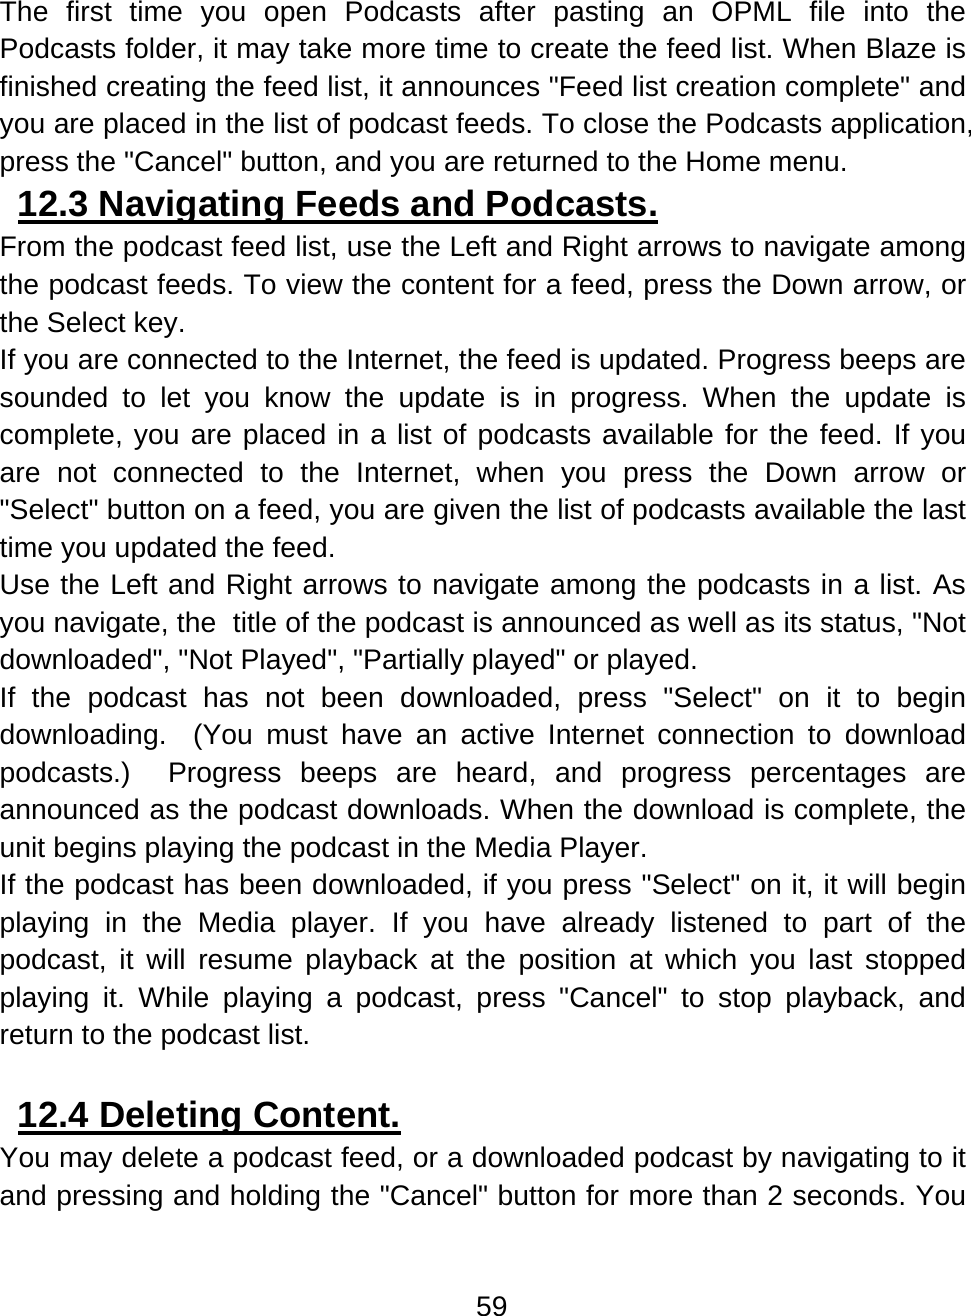 59  The first time you open Podcasts after pasting an OPML file into the Podcasts folder, it may take more time to create the feed list. When Blaze is finished creating the feed list, it announces &quot;Feed list creation complete&quot; and you are placed in the list of podcast feeds. To close the Podcasts application, press the &quot;Cancel&quot; button, and you are returned to the Home menu. 12.3 Navigating Feeds and Podcasts.  From the podcast feed list, use the Left and Right arrows to navigate among the podcast feeds. To view the content for a feed, press the Down arrow, or the Select key.  If you are connected to the Internet, the feed is updated. Progress beeps are sounded to let you know the update is in progress. When the update is complete, you are placed in a list of podcasts available for the feed. If you are not connected to the Internet, when you press the Down arrow or &quot;Select&quot; button on a feed, you are given the list of podcasts available the last time you updated the feed.   Use the Left and Right arrows to navigate among the podcasts in a list. As you navigate, the  title of the podcast is announced as well as its status, &quot;Not downloaded&quot;, &quot;Not Played&quot;, &quot;Partially played&quot; or played.  If the podcast has not been downloaded, press &quot;Select&quot; on it to begin downloading.  (You must have an active Internet connection to download podcasts.)  Progress beeps are heard, and progress percentages are announced as the podcast downloads. When the download is complete, the unit begins playing the podcast in the Media Player. If the podcast has been downloaded, if you press &quot;Select&quot; on it, it will begin playing in the Media player. If you have already listened to part of the podcast, it will resume playback at the position at which you last stopped playing it. While playing a podcast, press &quot;Cancel&quot; to stop playback, and return to the podcast list.   12.4 Deleting Content.  You may delete a podcast feed, or a downloaded podcast by navigating to it and pressing and holding the &quot;Cancel&quot; button for more than 2 seconds. You 